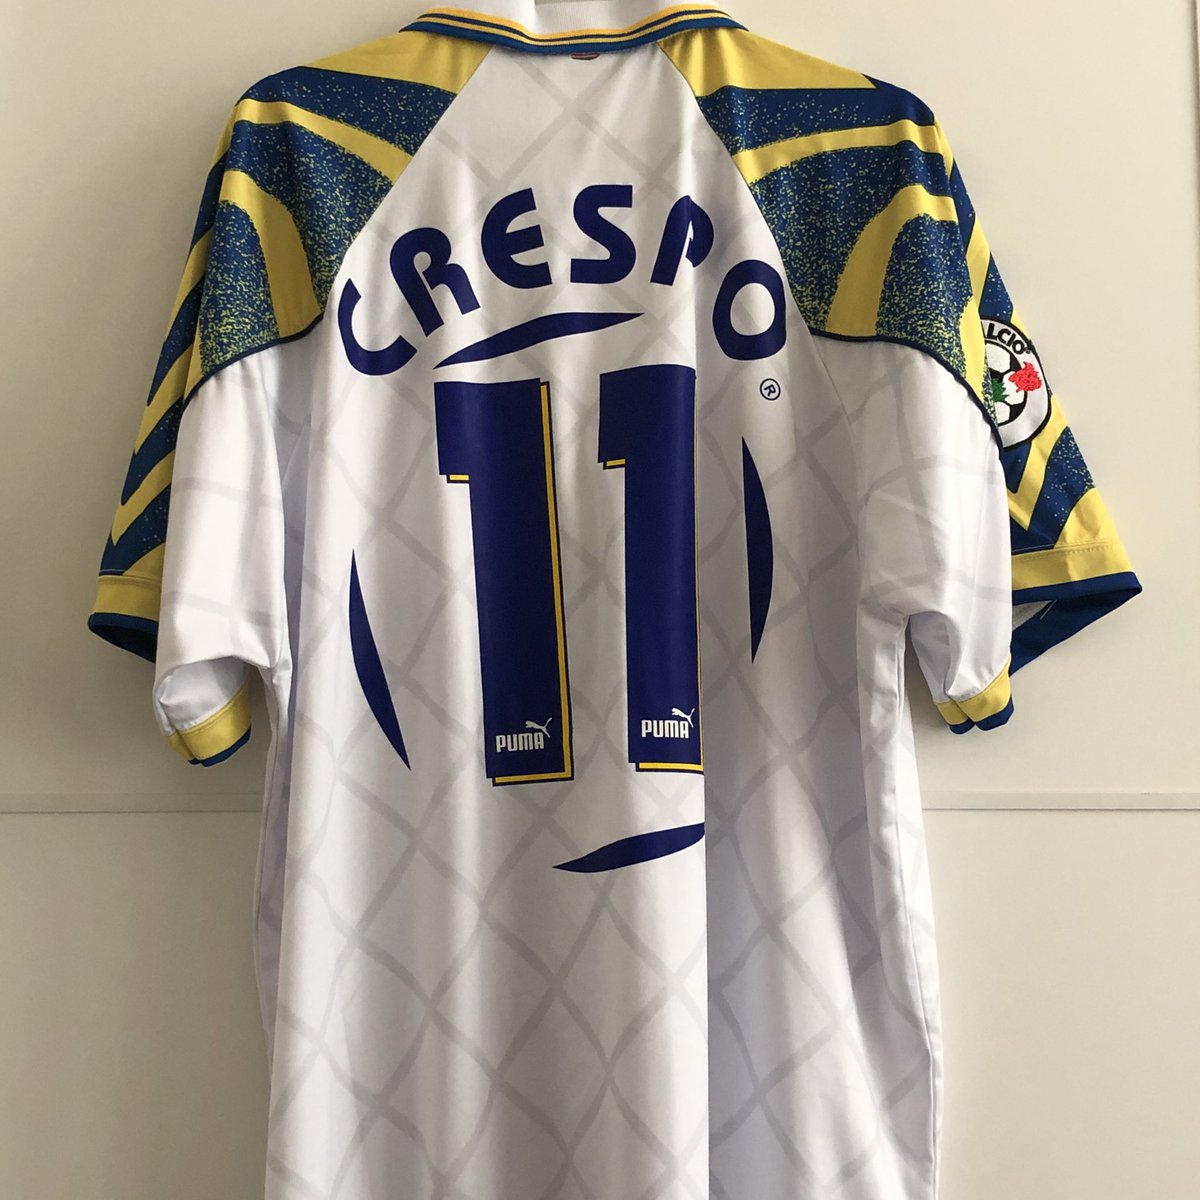 . @ParmaCalcio_en Home Kit, 1996/97Puma, unofficially licensed? (Old replica shirts are difficult to assess)Personalised:  @crespo, 11Just because there isn’t any football on TV, that doesn’t mean that I can’t wear a football shirt to stay at home. #FootballShirtCollection